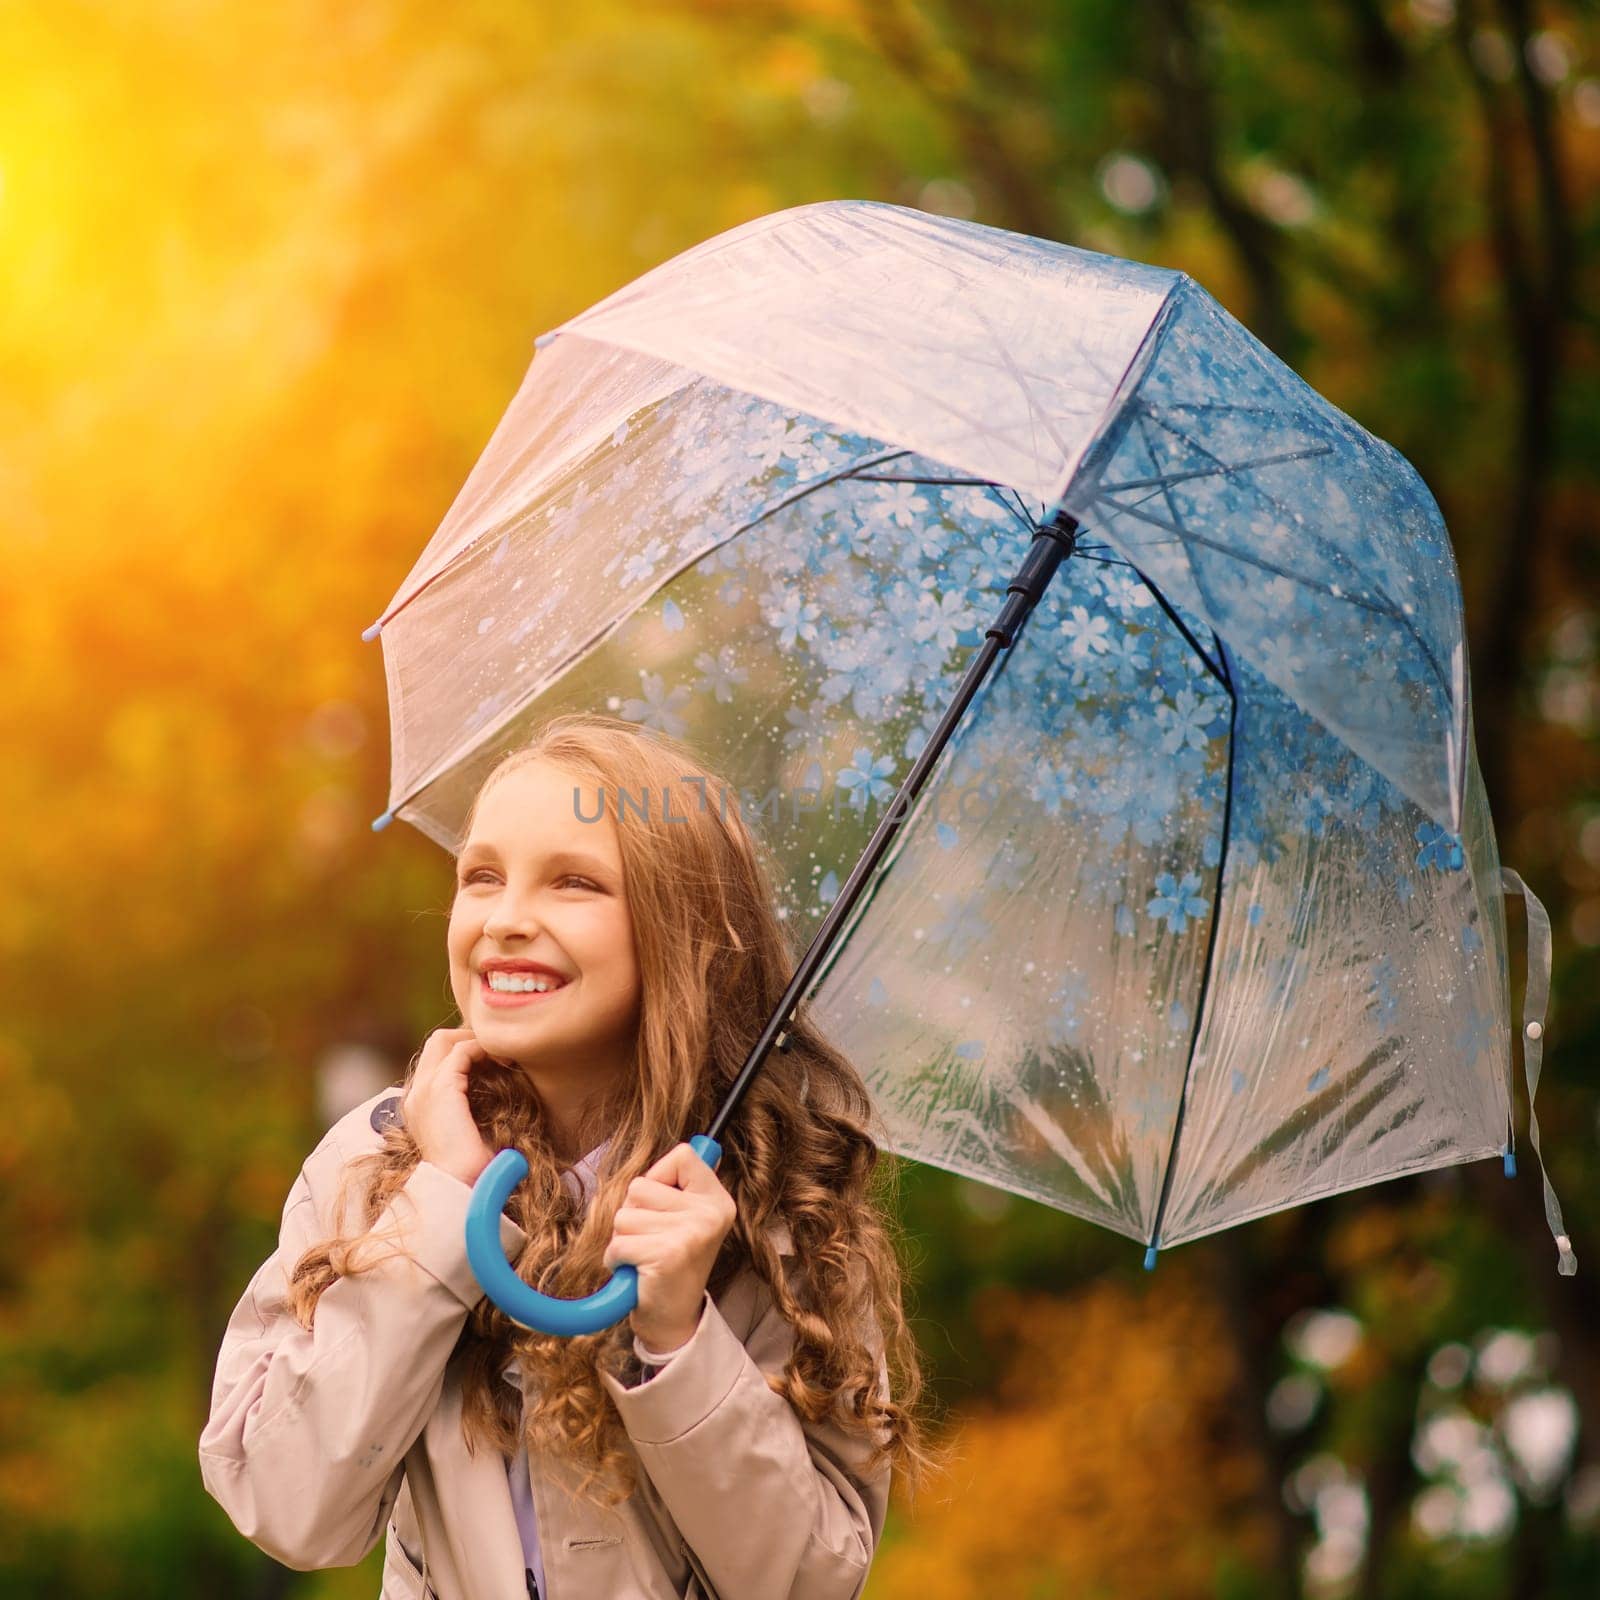 Young attractive smiling girl under umbrella in an autumn forest